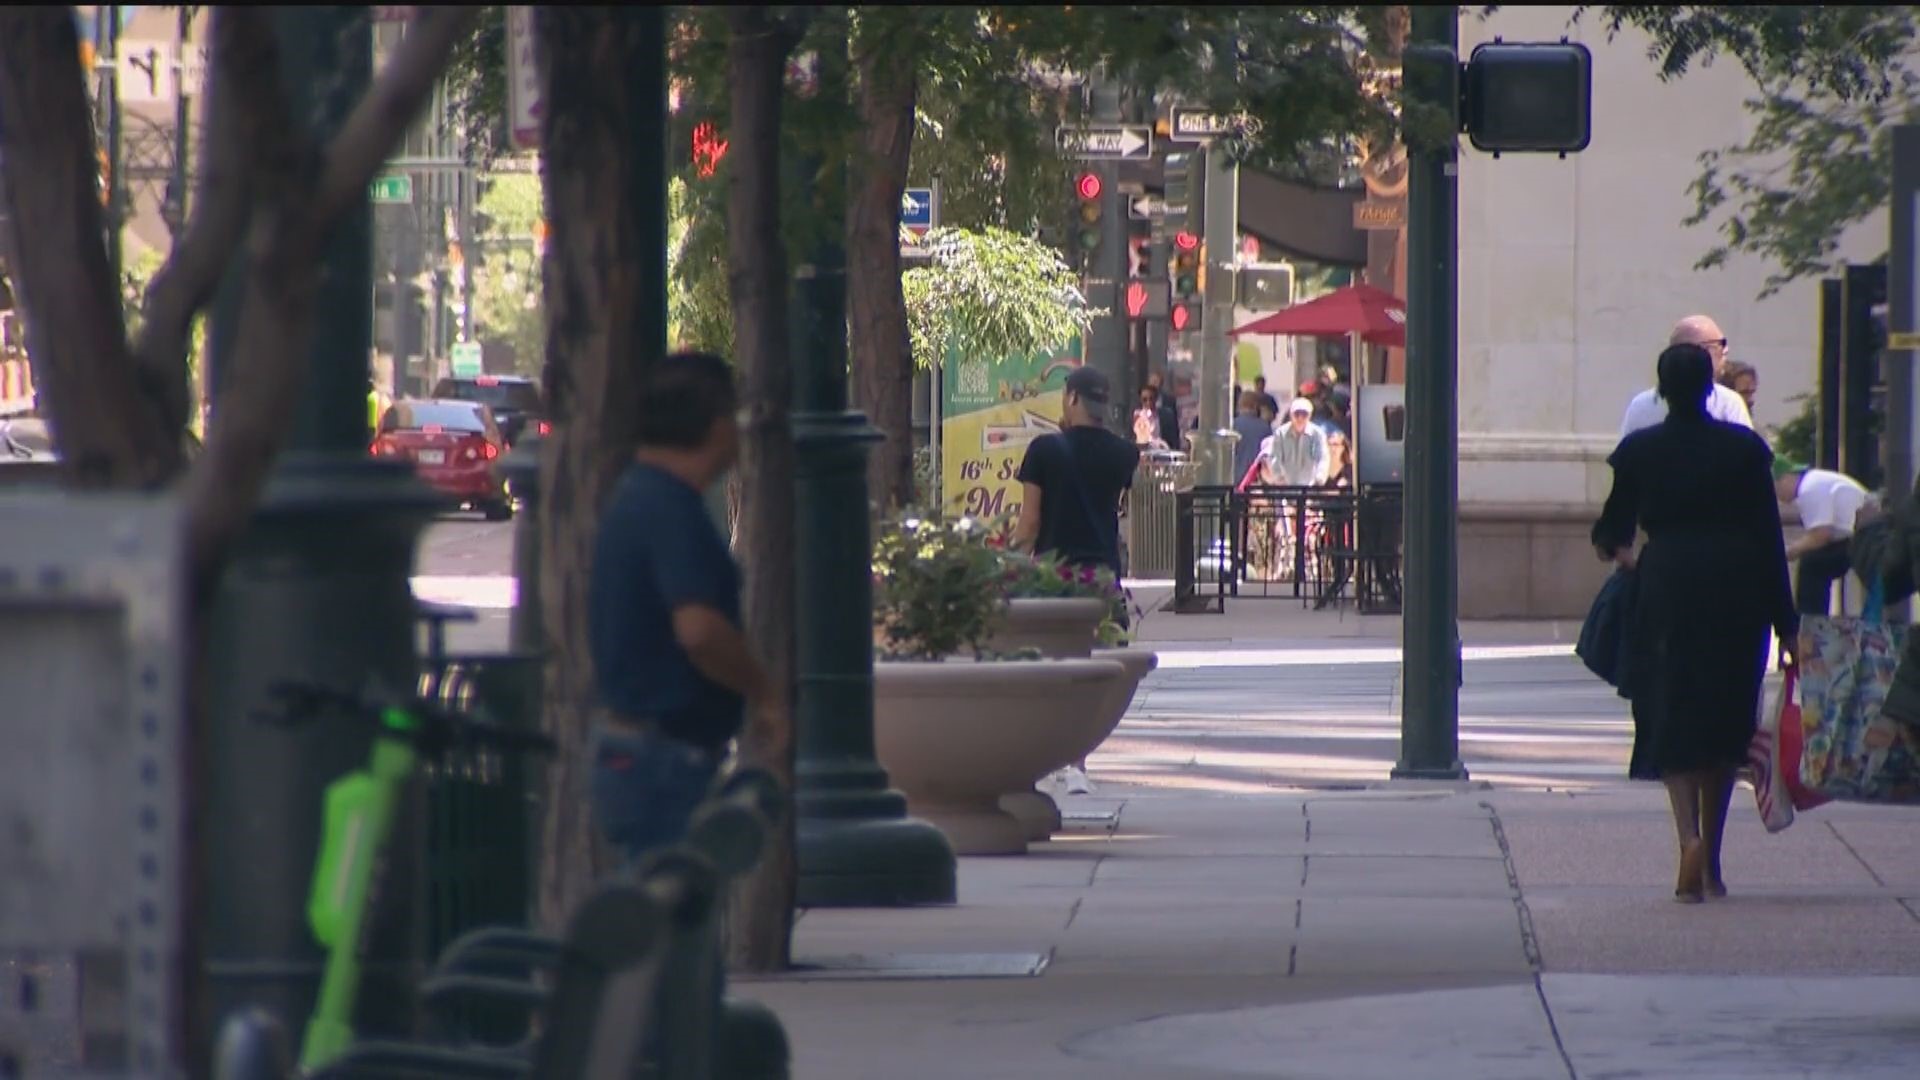 Three years after a virus changed all of our lives, downtown Denver is getting closer to normal.